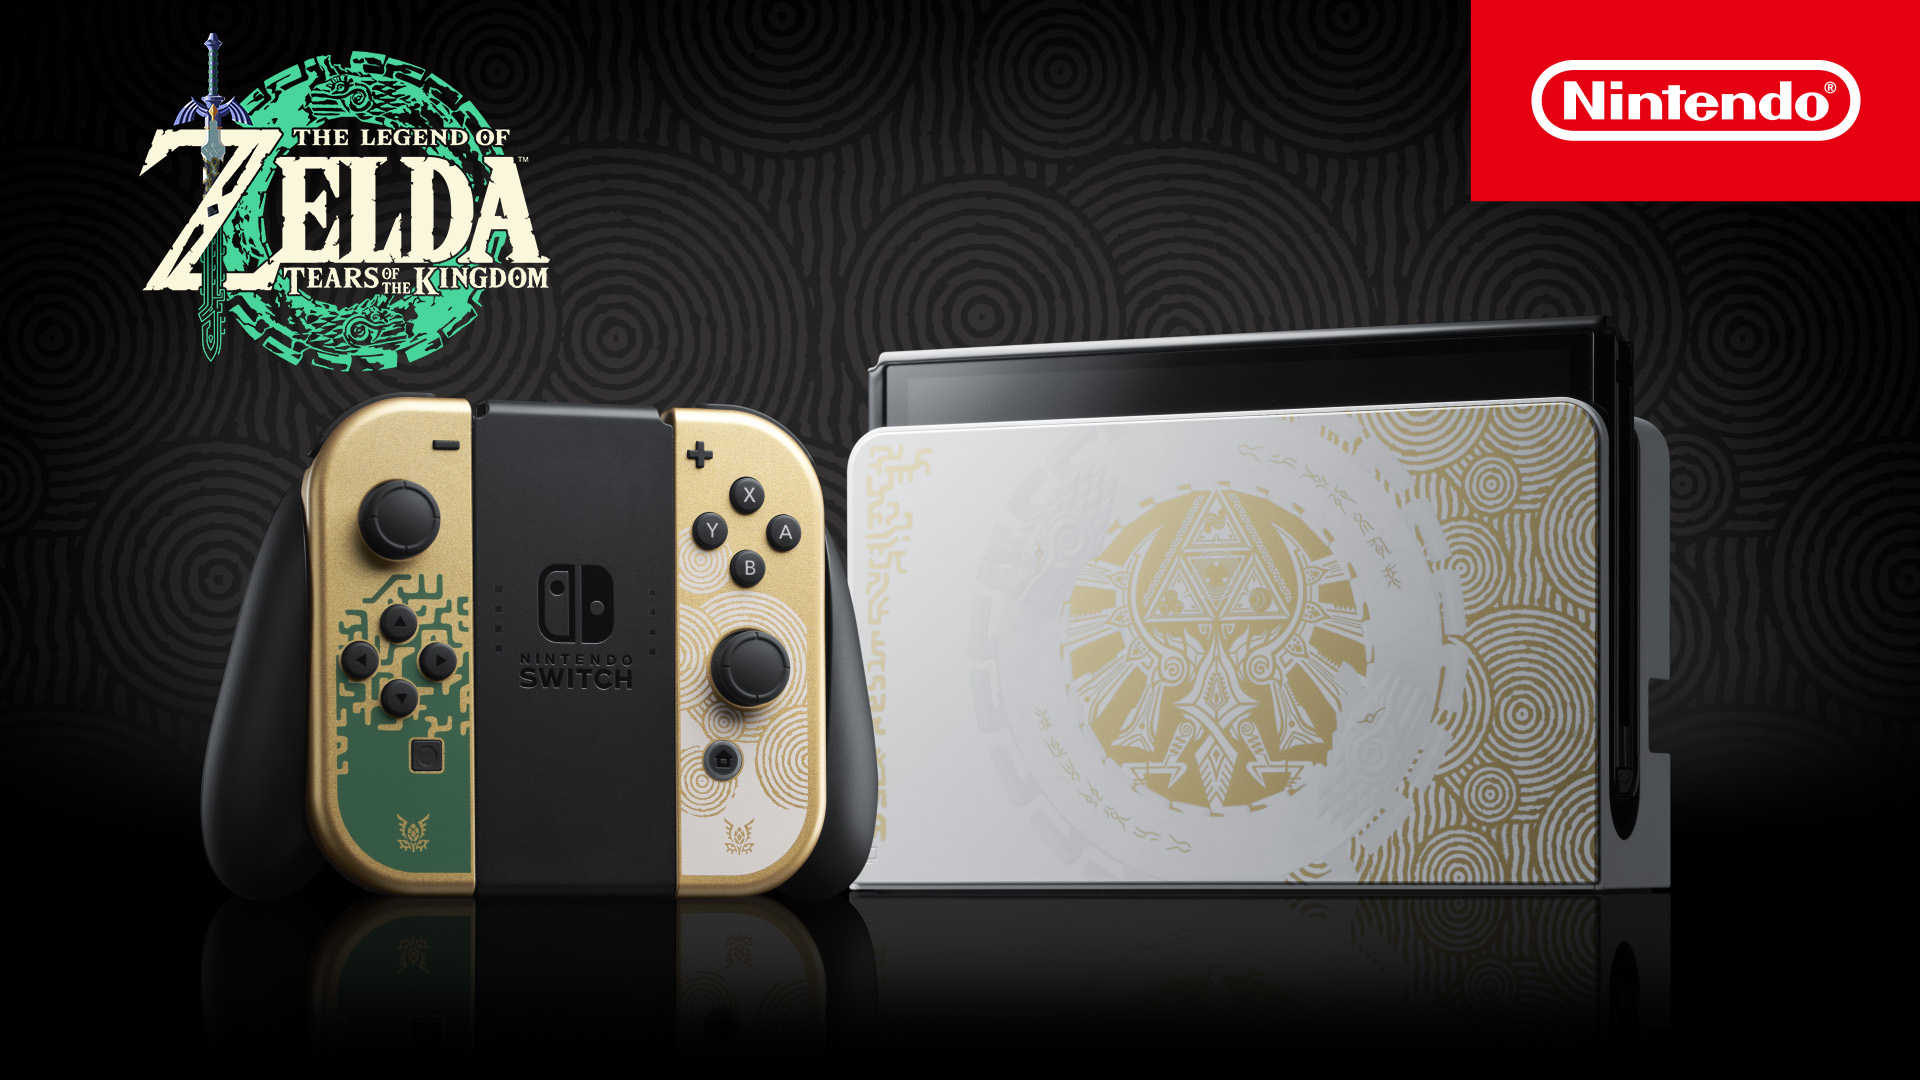 Nintendo News: Nintendo Switch – Kingdom Legend 28 of Model The Edition - Launches Business Zelda: April Wire | of Tears the OLED on